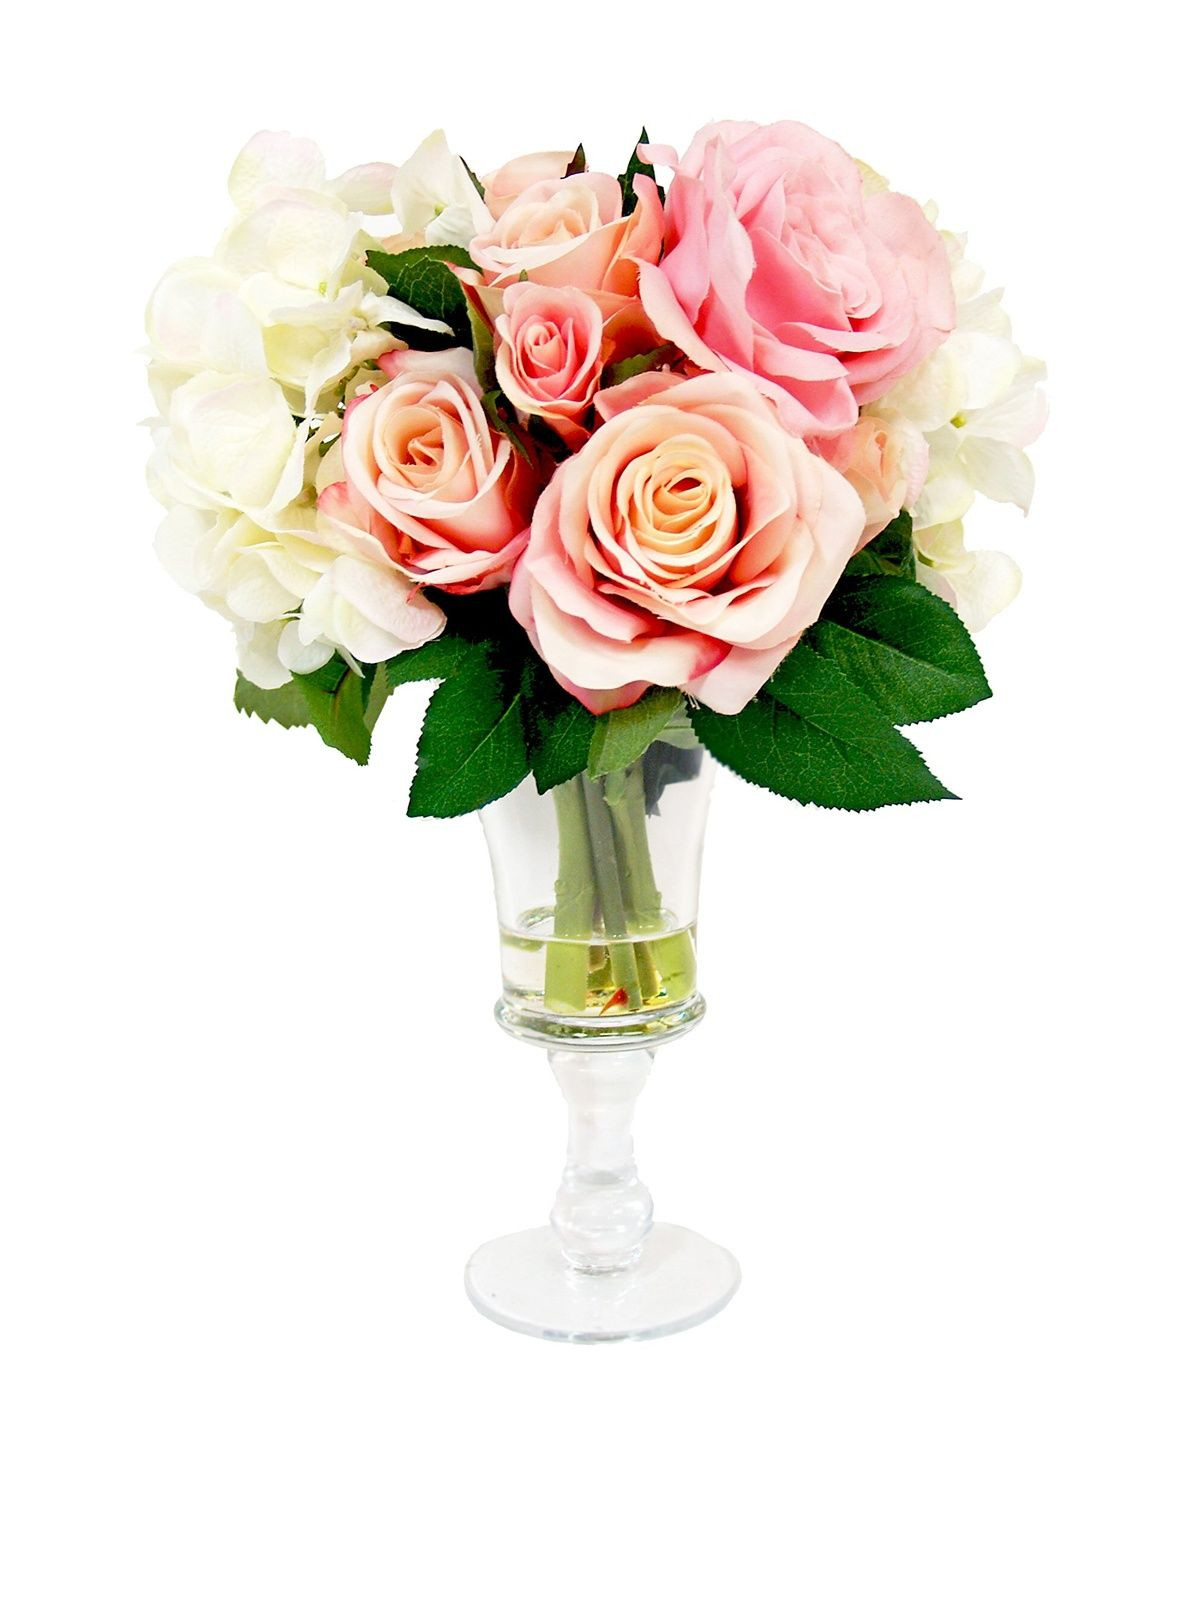 24 Perfect White Hydrangea In Glass Vase 2024 free download white hydrangea in glass vase of creative displays roses with hydrangeas bouquet pink white green at pertaining to creative displays roses with hydrangeas bouquet pink white green at myhabit